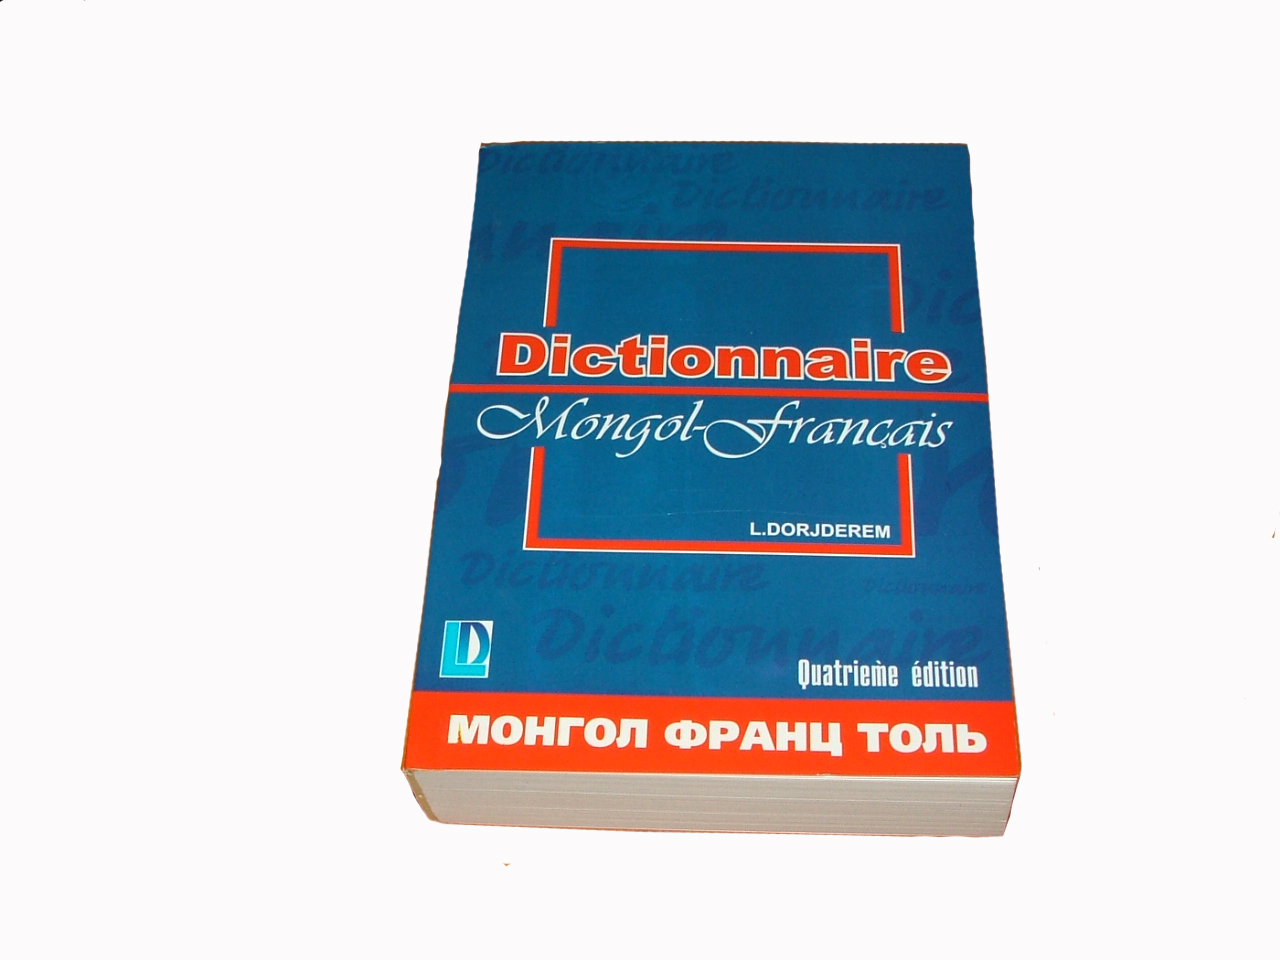 Mongolian - French dictionary, ref. BOO-11-00-001